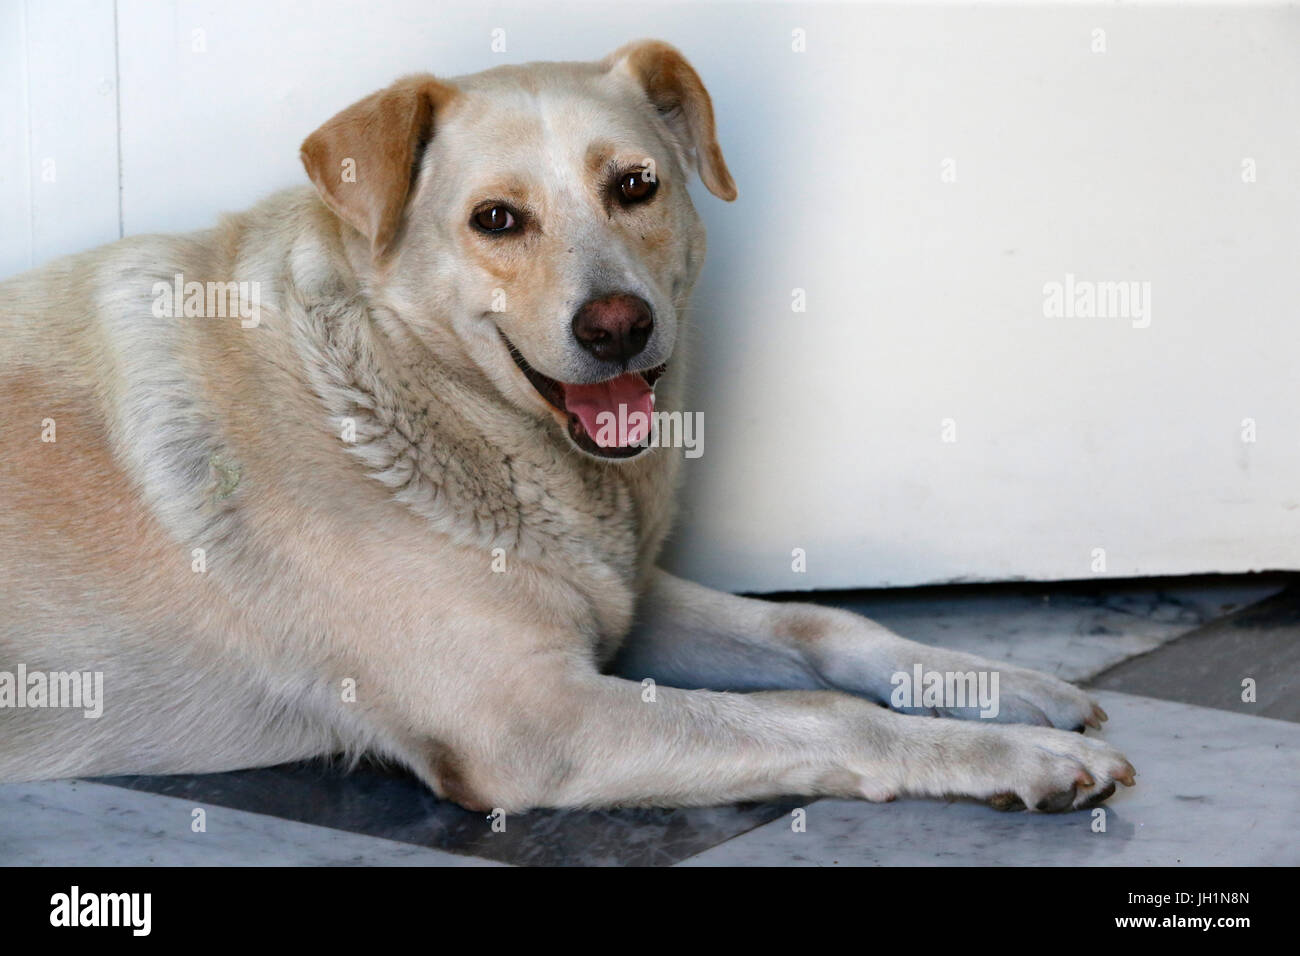 Dog suffering from summer heat. Italy. Stock Photo